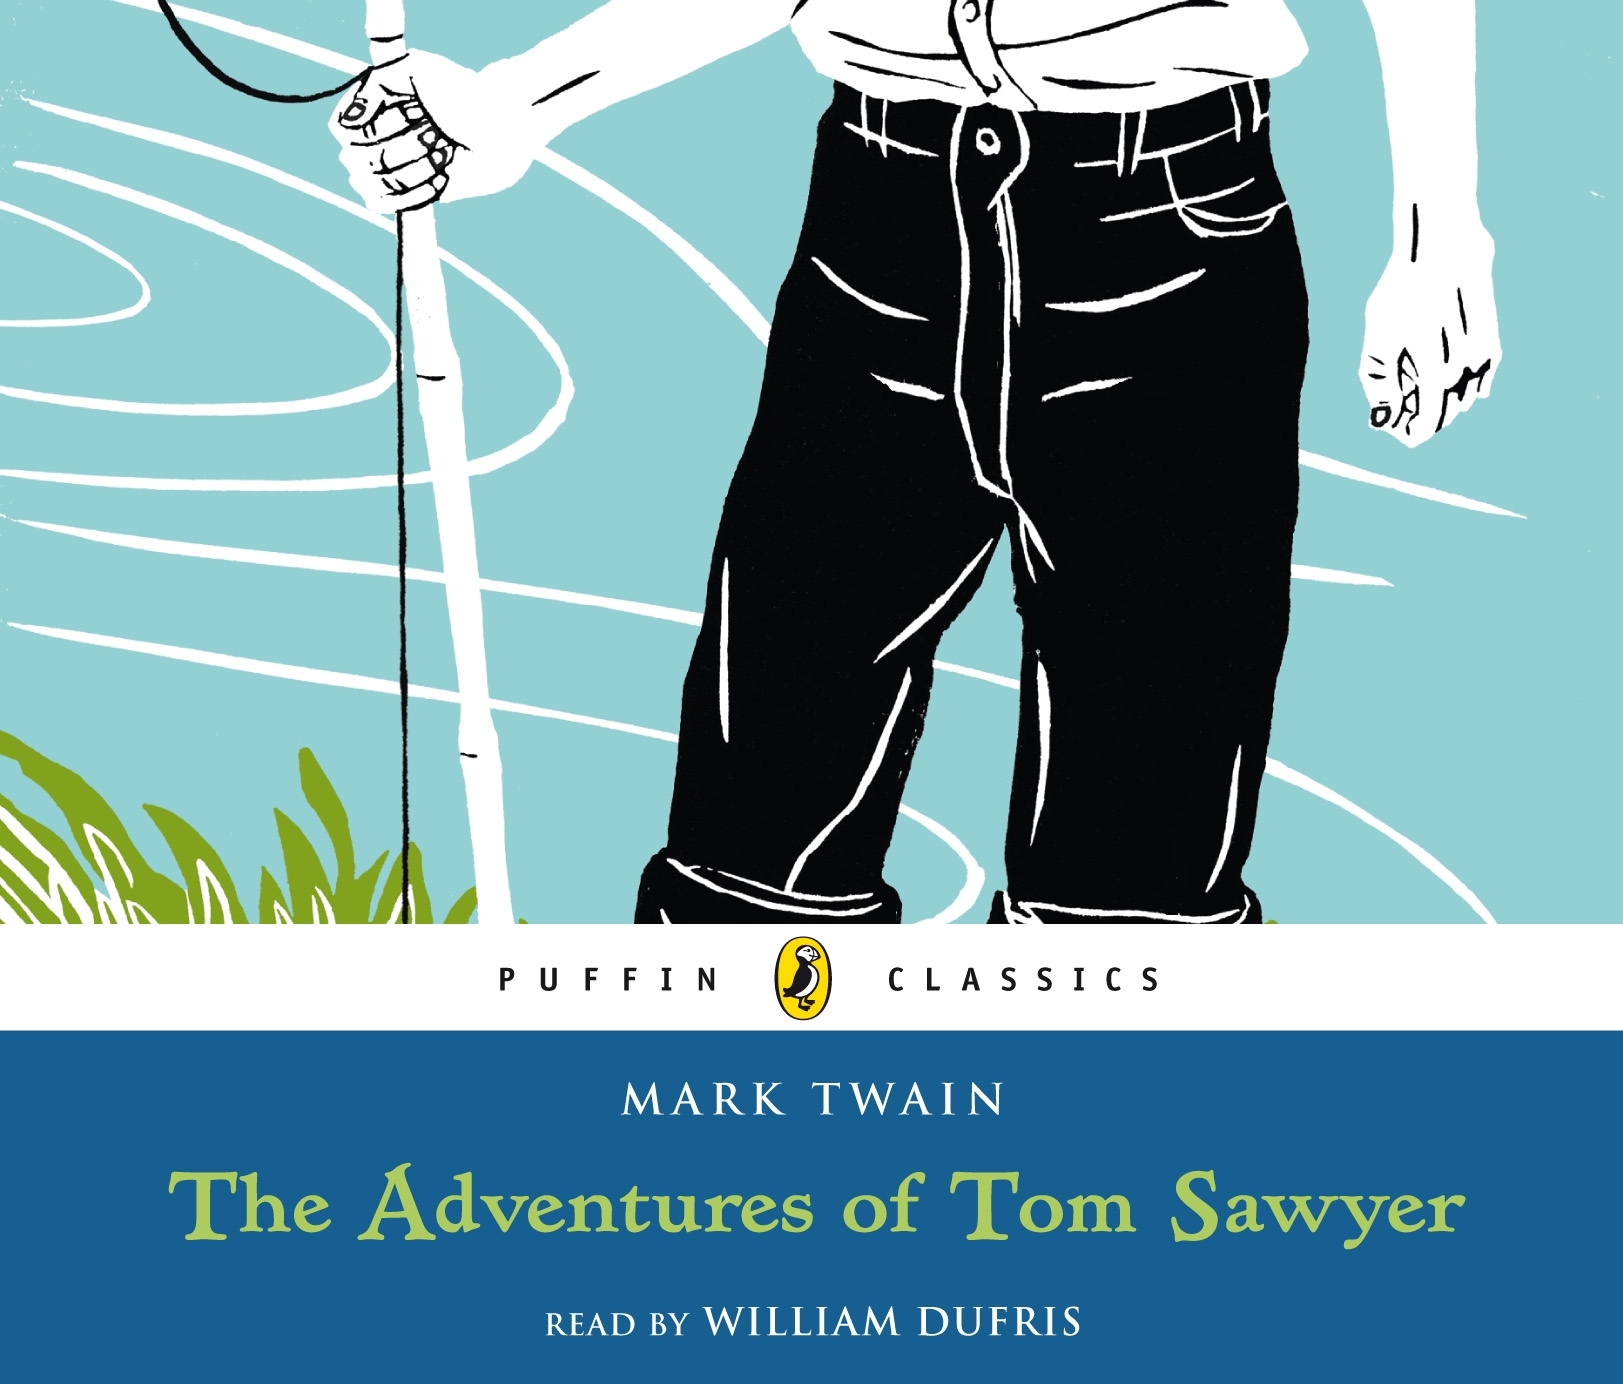 The Adventures of Tom Sawyer. Mark Twain the Adventures of Tom. Mark Twain Tom Sawyer. Tom Sawyer book Cover.